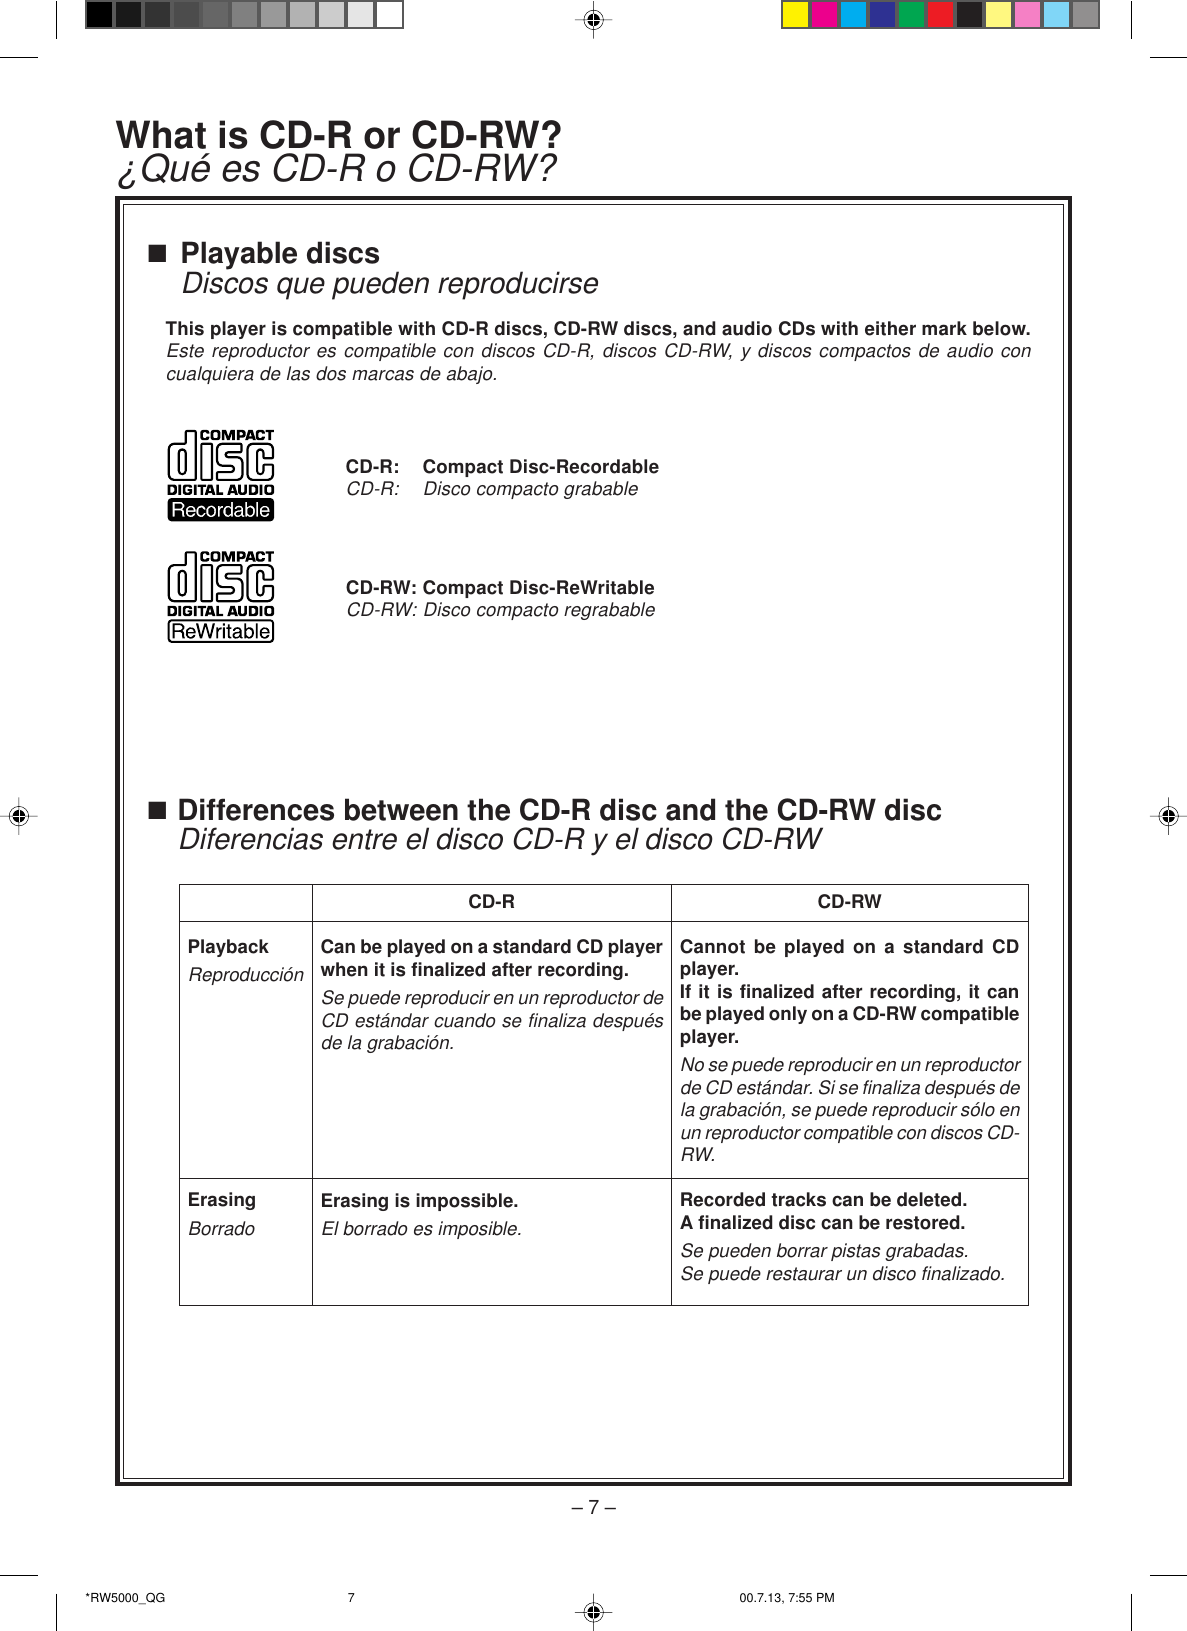 Page 7 of 8 - Sharp Cdrw5000-Quick-Guide CD-RW5000 Quick Start Guide